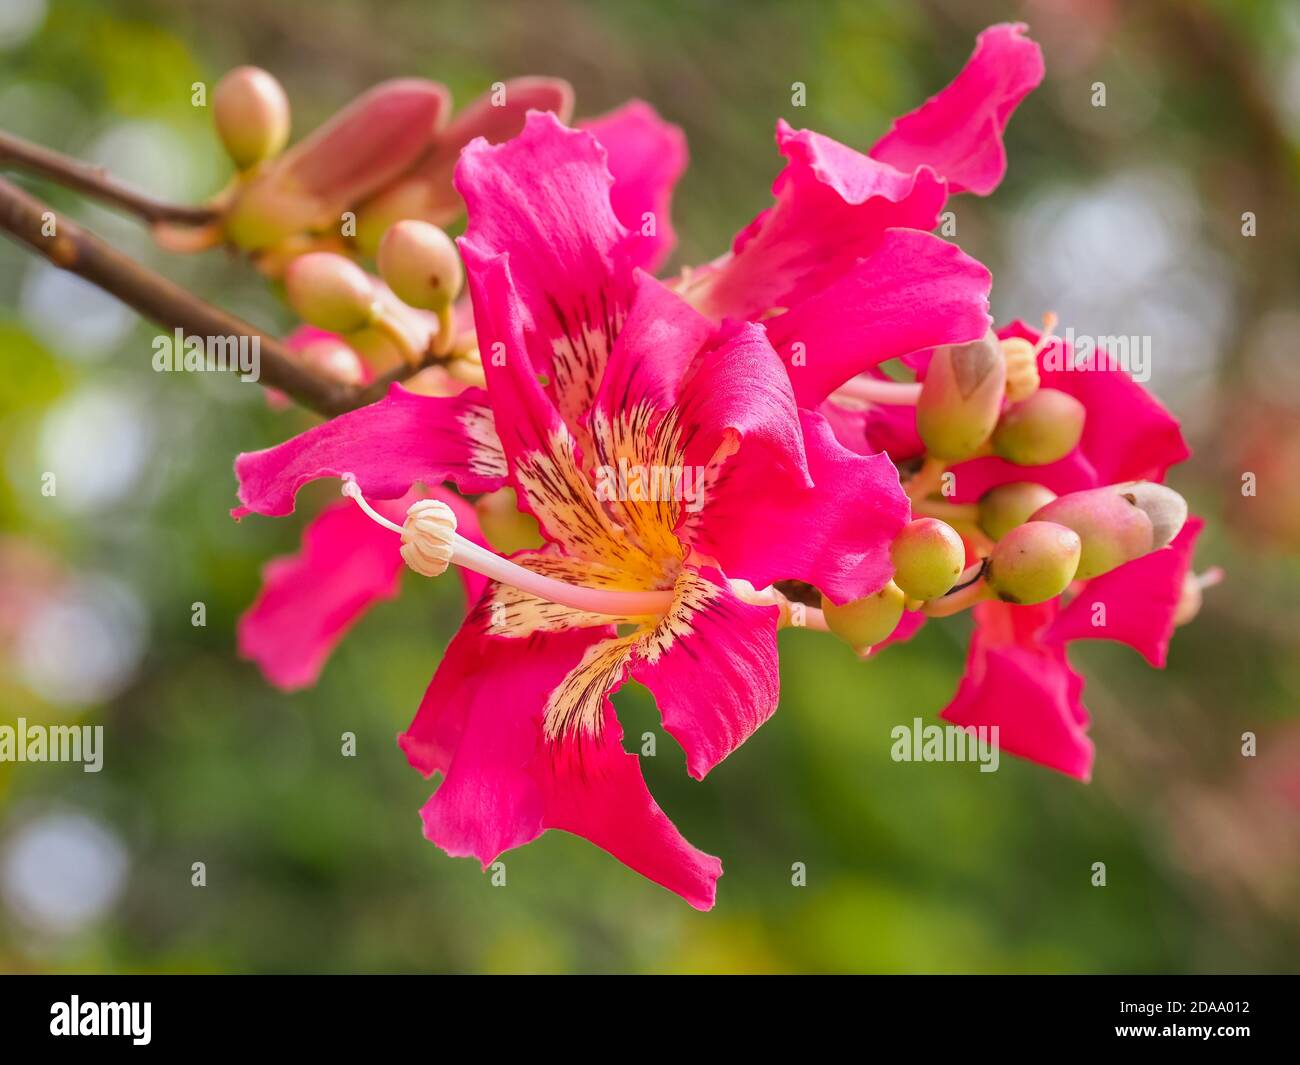 Silk floss tree or Ceiba speciosa flower. Hibiscus-shaped blossom with creamy-whitish center and pink tips. Chorisia speciosa of the family Malvaceae. Stock Photo